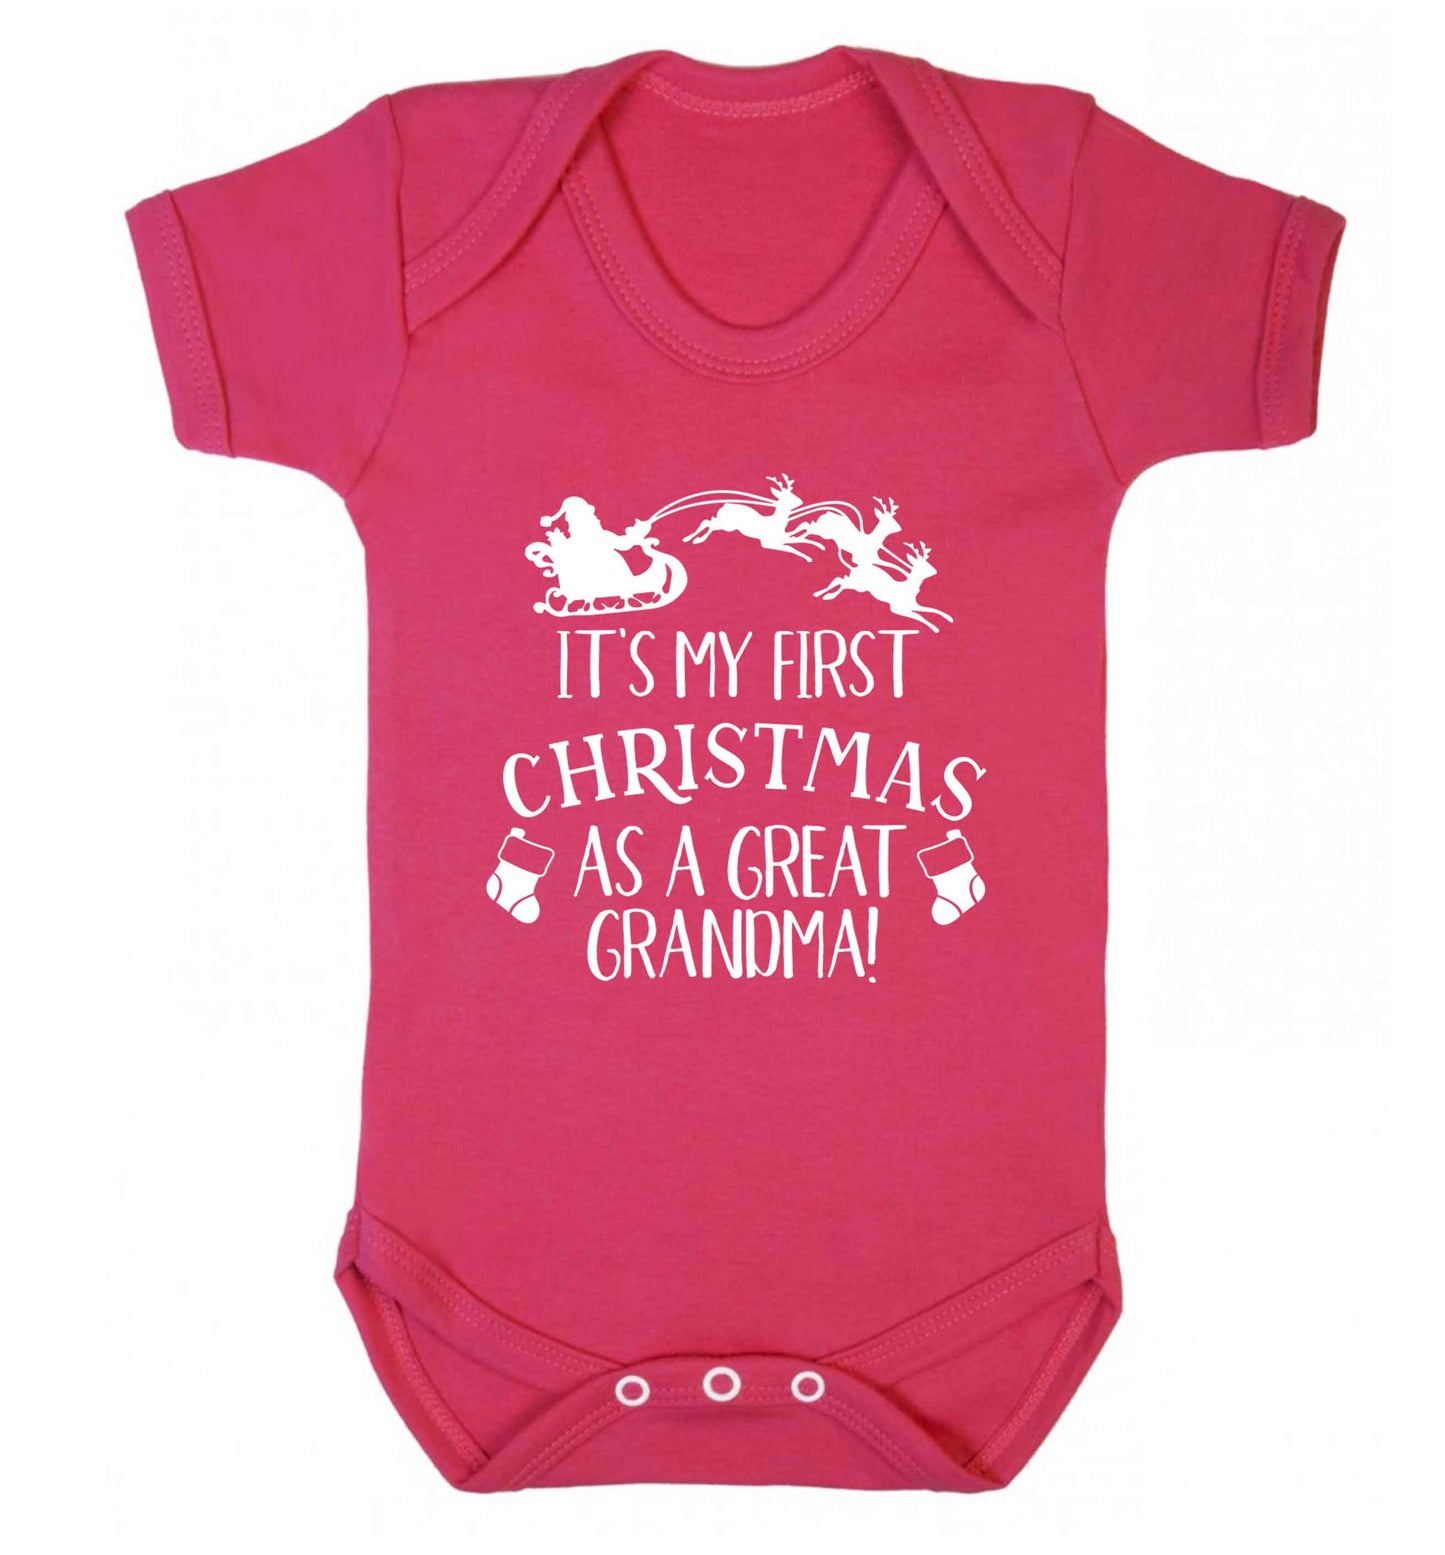 It's my first Christmas as a great grandma! Baby Vest dark pink 18-24 months